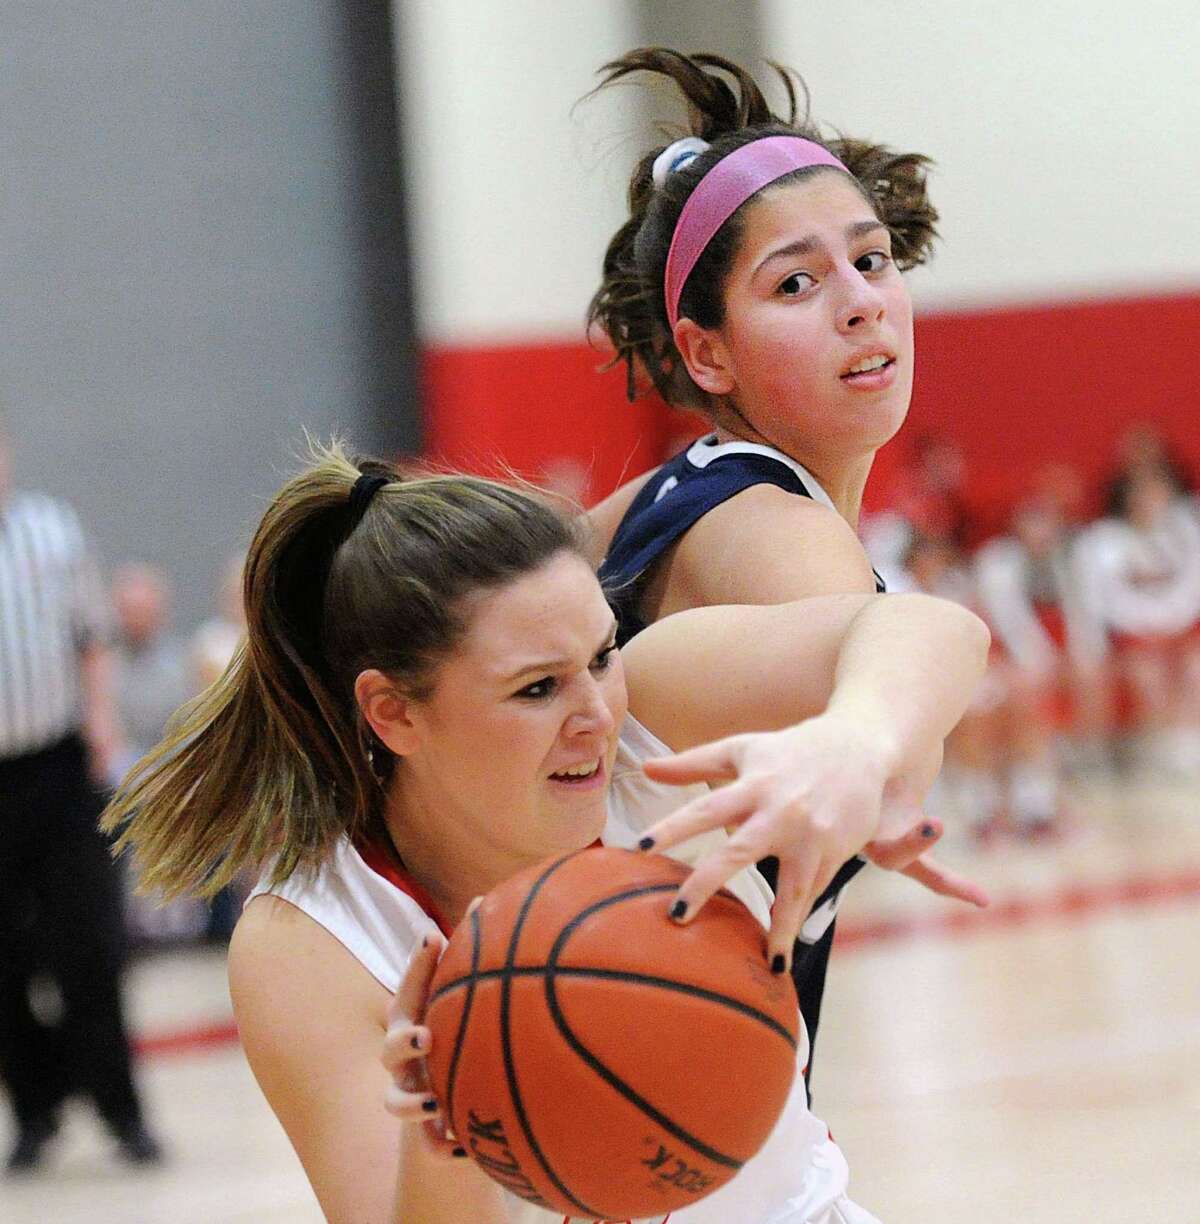 Arianna Gerig of Staples, top, attempts to steal the ball from Jordan Stefanowicz of Greenwich during the girls high school basketball game between Greenwich High School and Staples High School at Greenwich, Conn., Friday, Jan. 19, 2018.